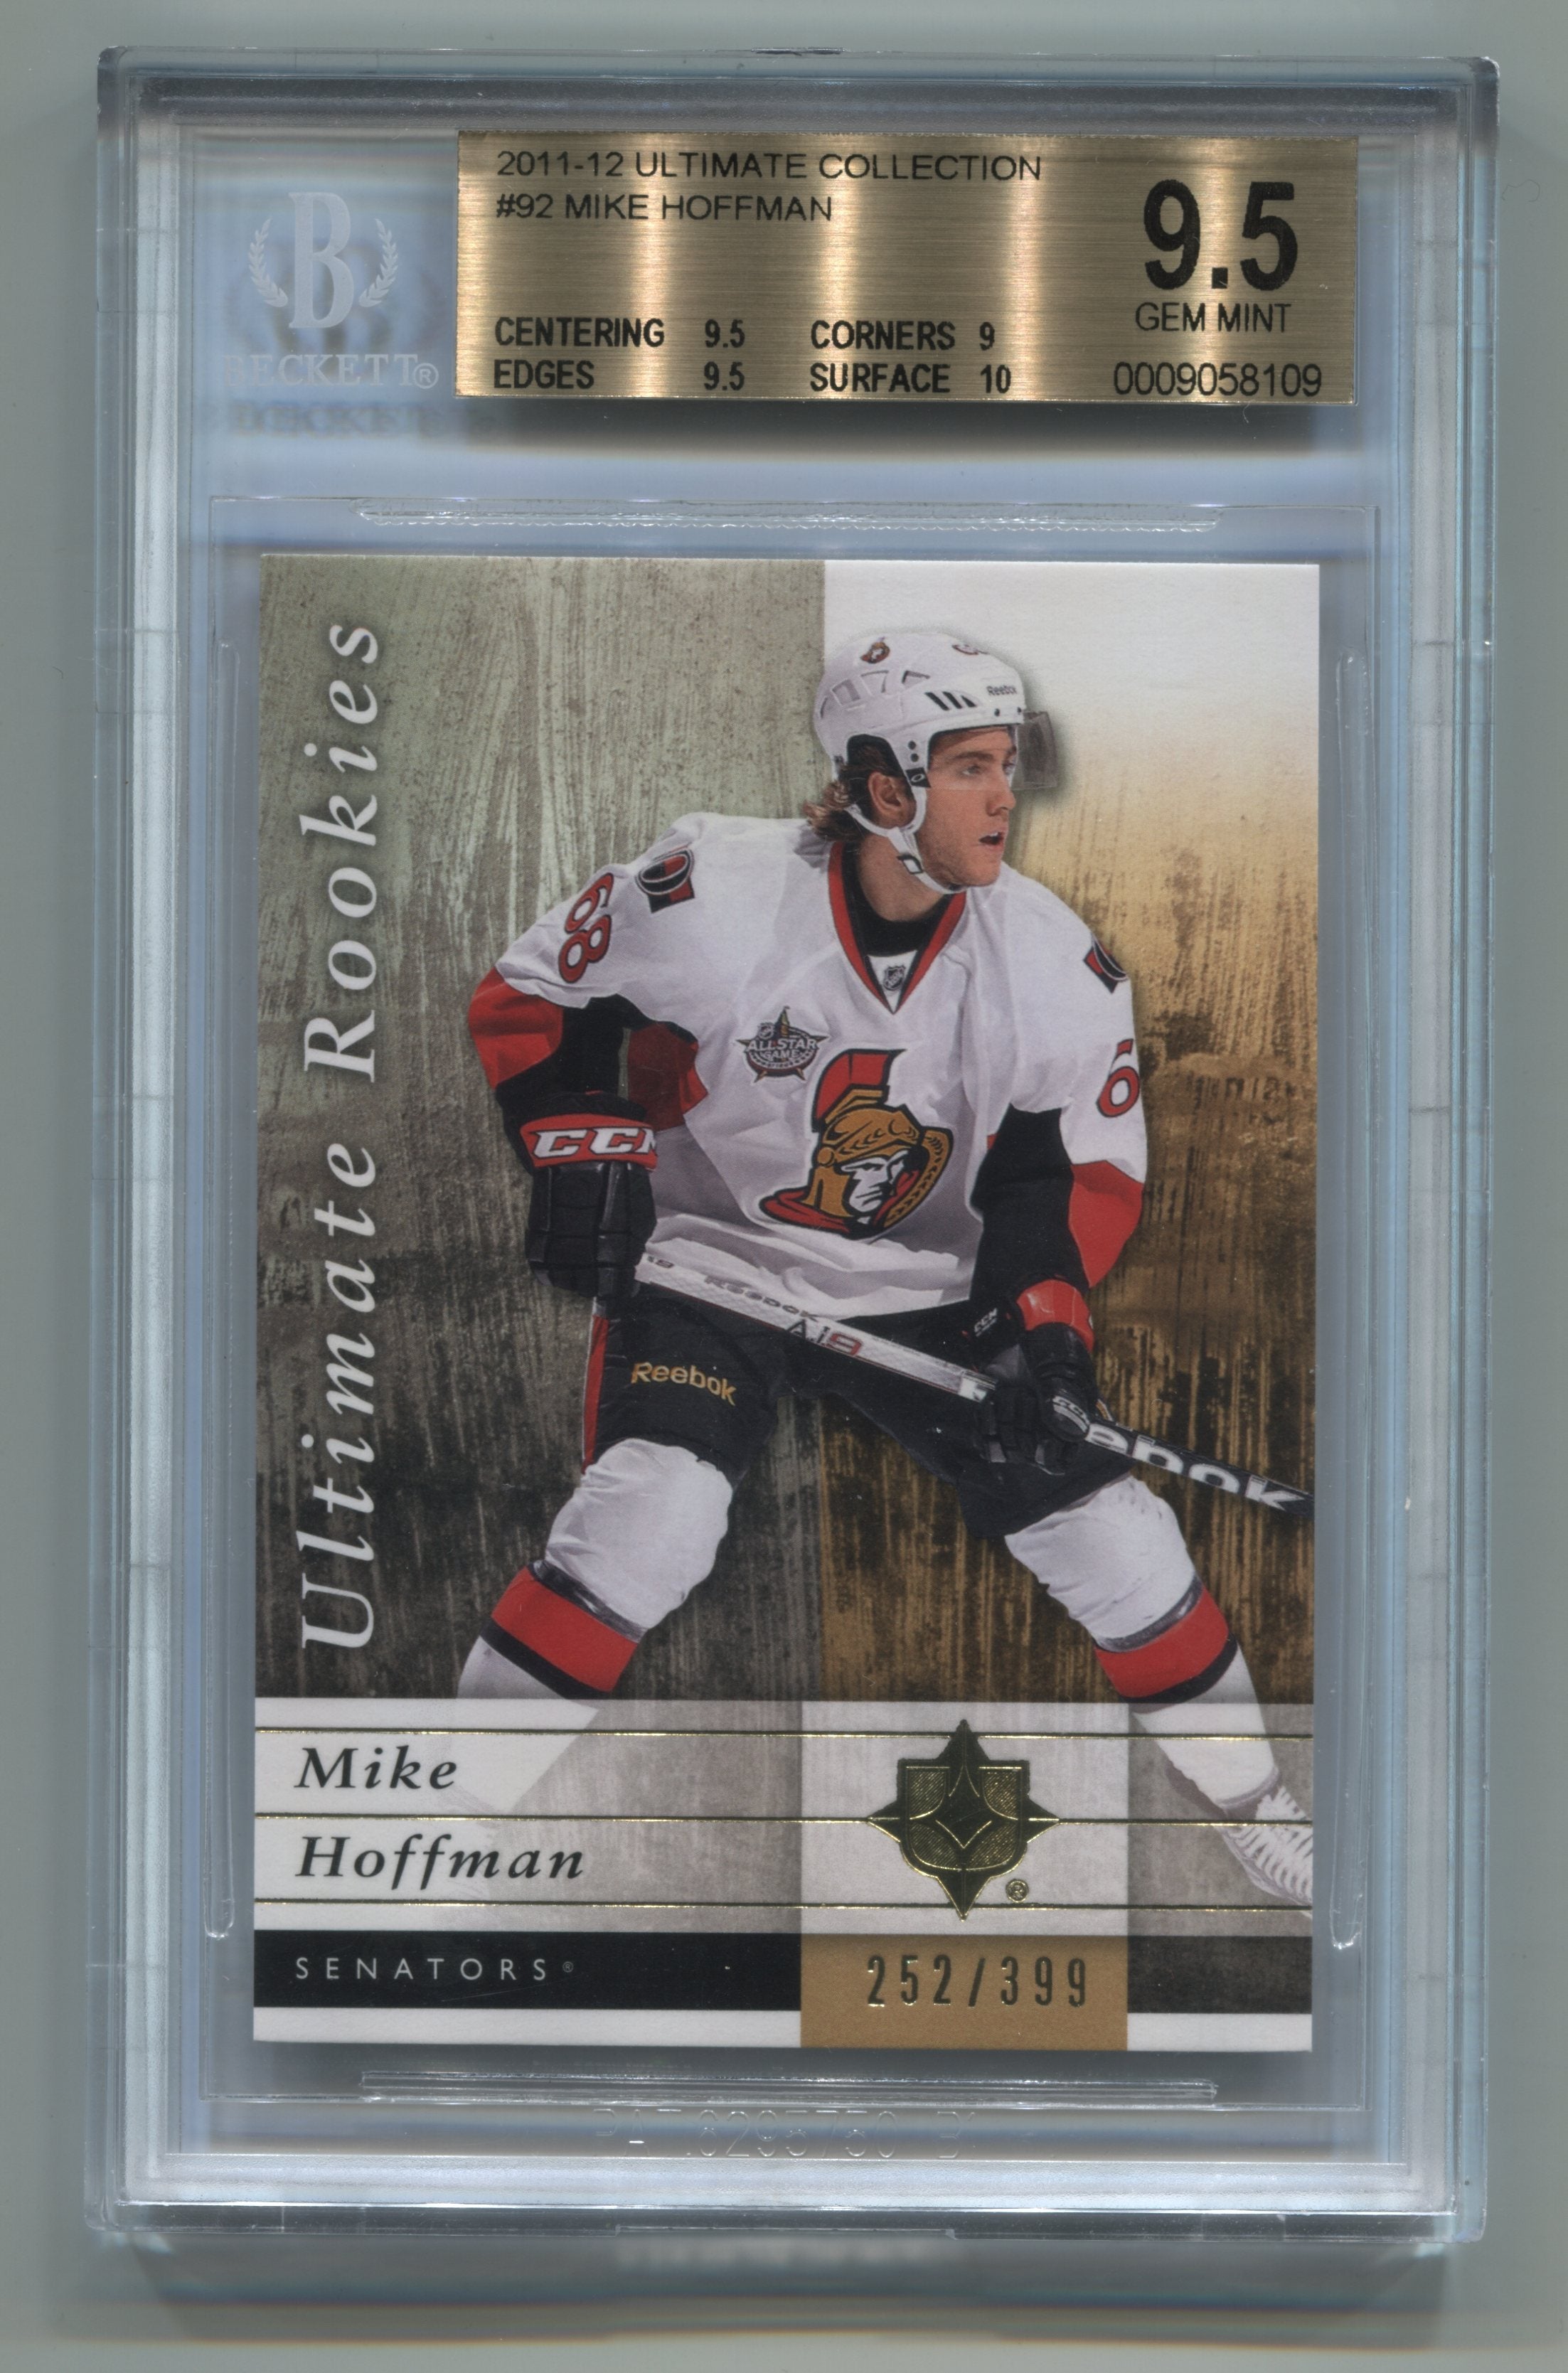 2011-12 Ultimate Collection #92 Mike Hoffman #252/399 BGS 9.5 (Rookie) | Eastridge Sports Cards